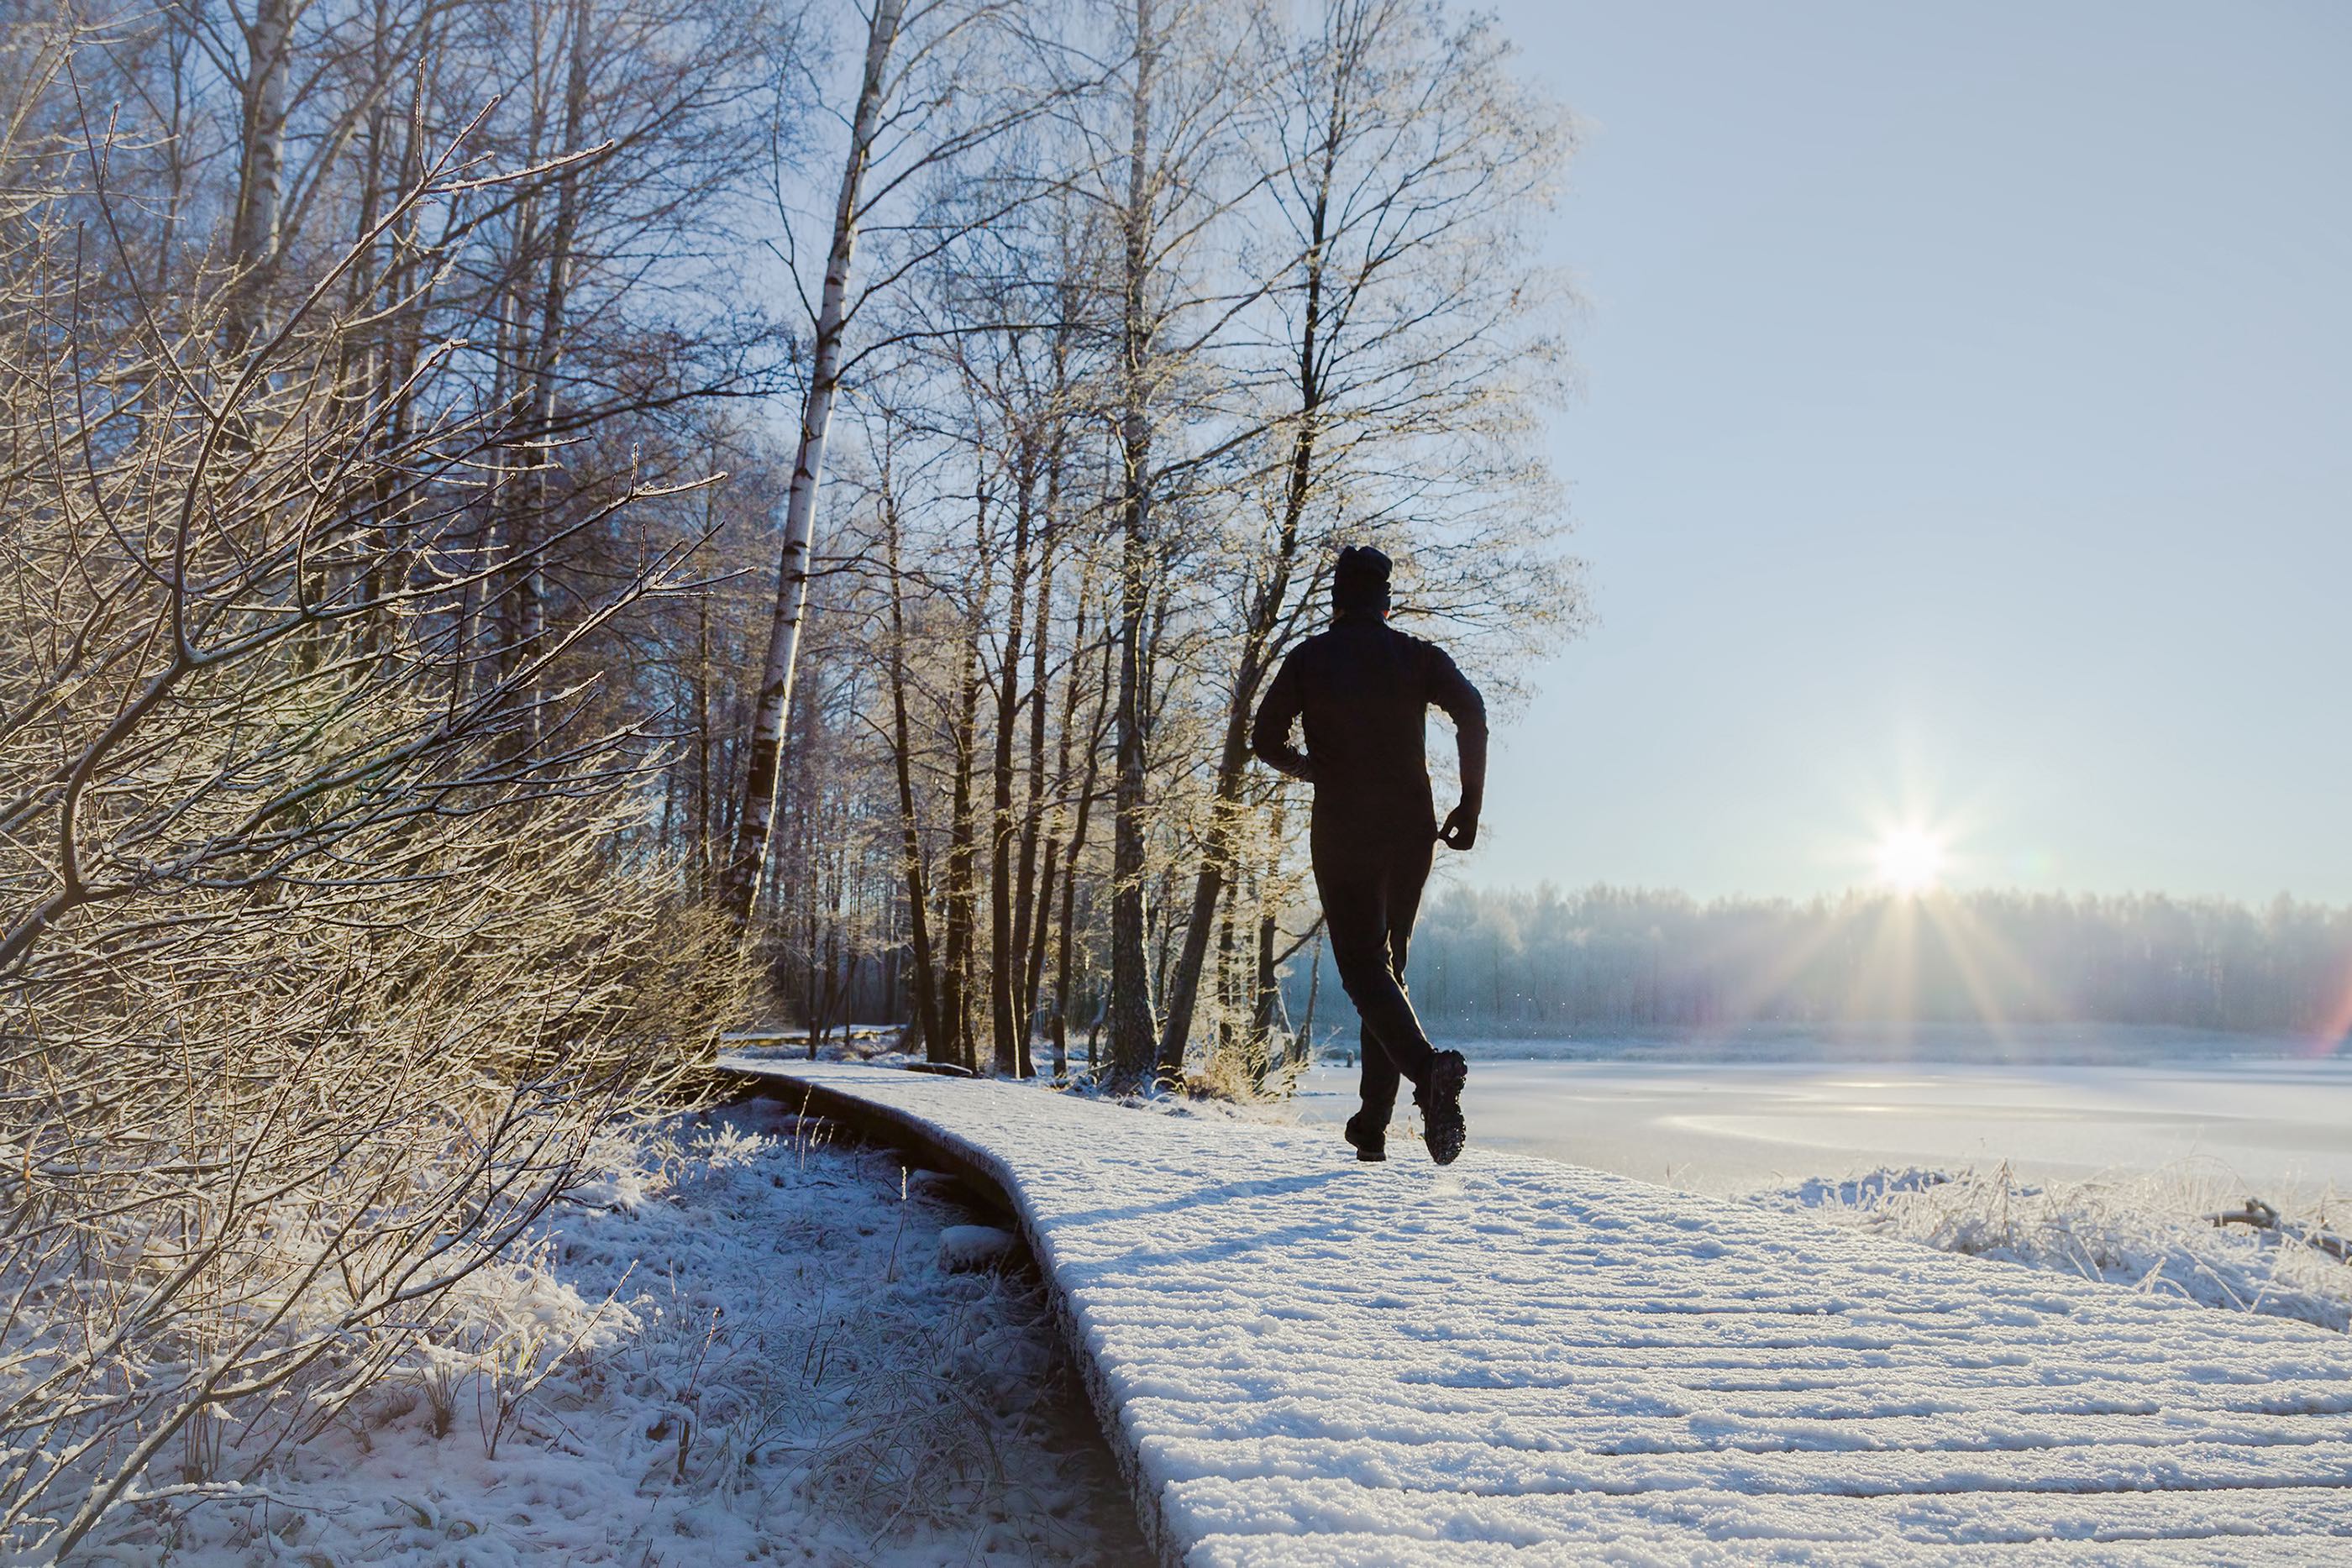 Winter running can suck. But it doesn’t have to.